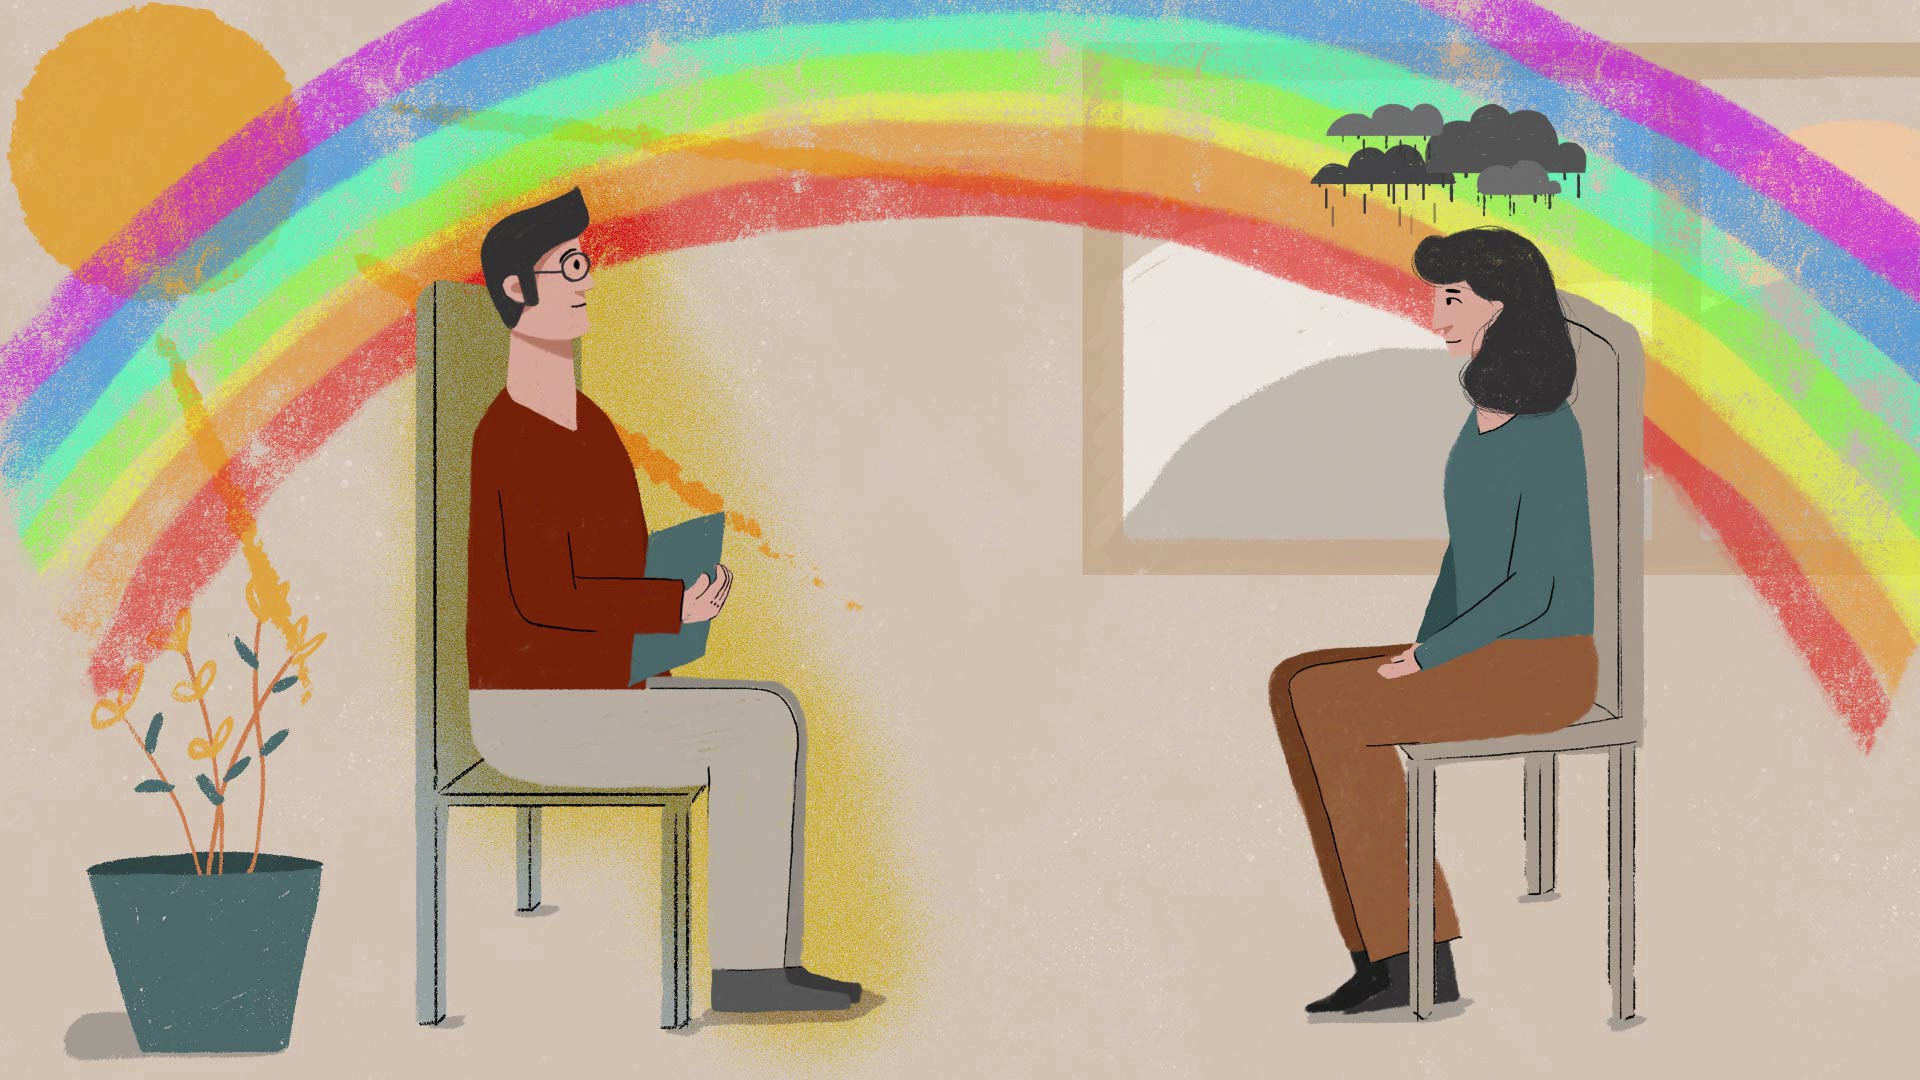 Therapist and client sitting together beneath rainbow representing compassion